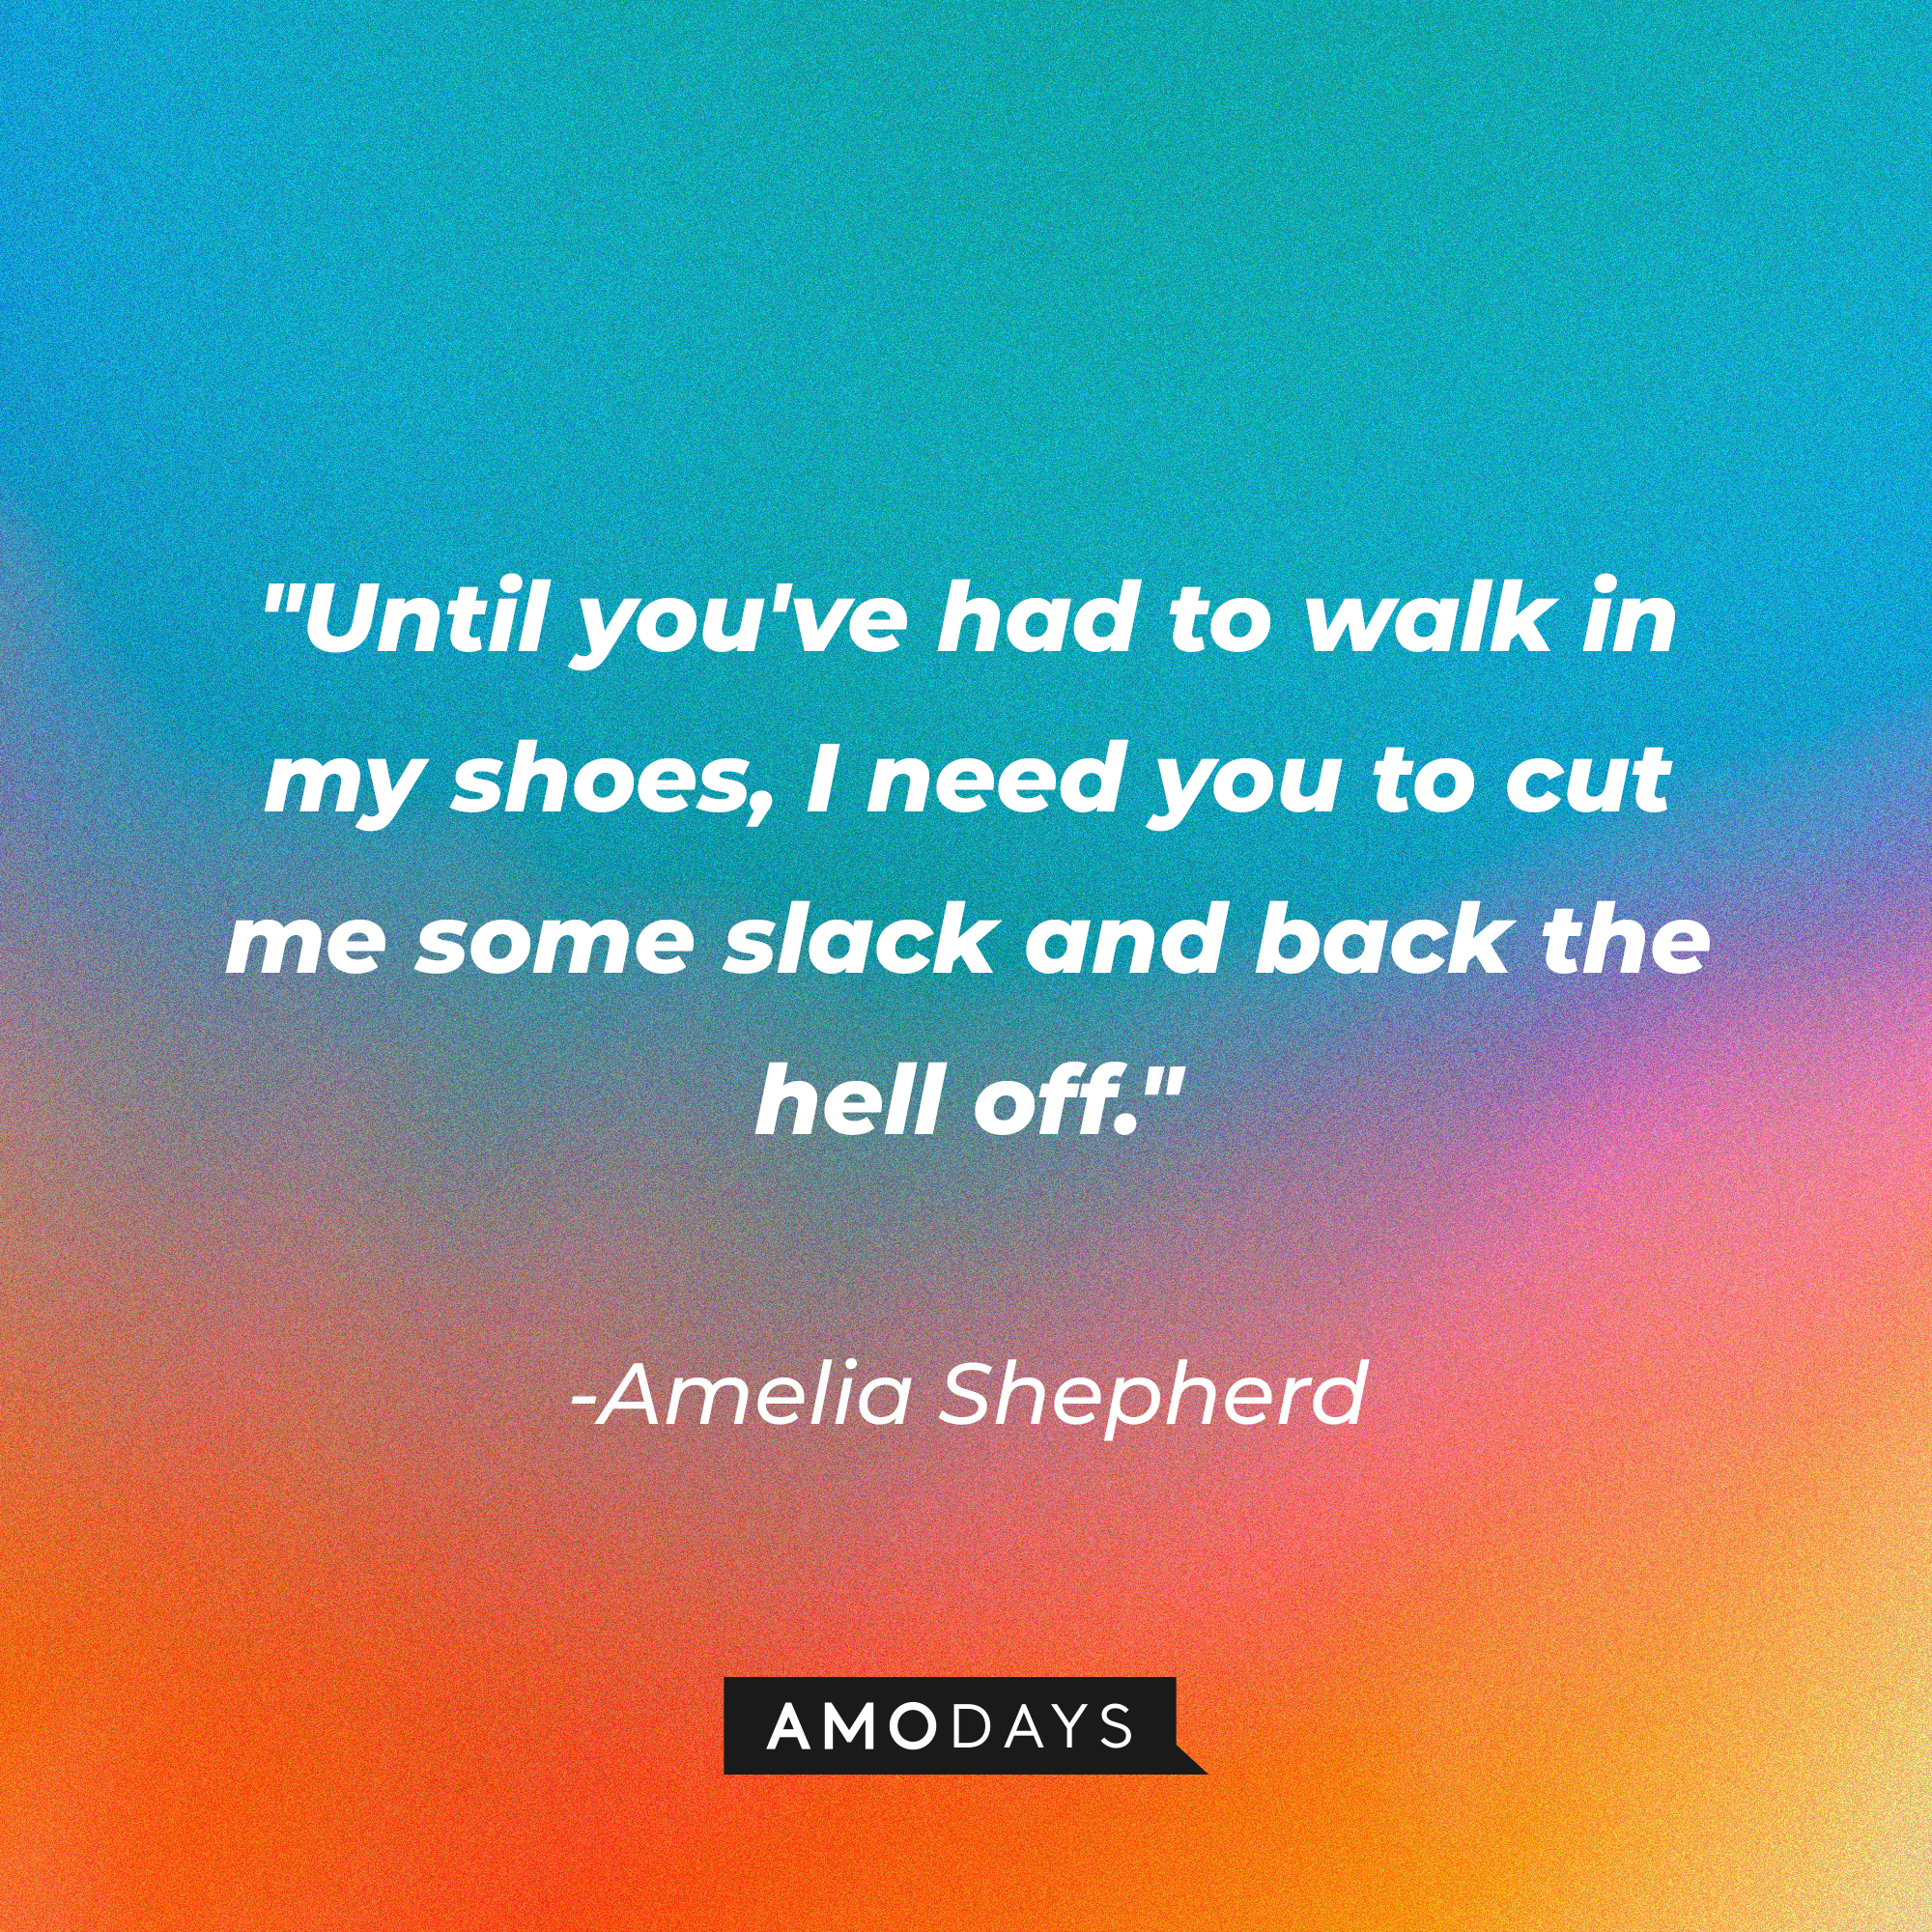 Amelia Shepherd's quote: "Until you've had to walk in my shoes, I need you to cut me some slack and back the hell off." | Source: AmoDays